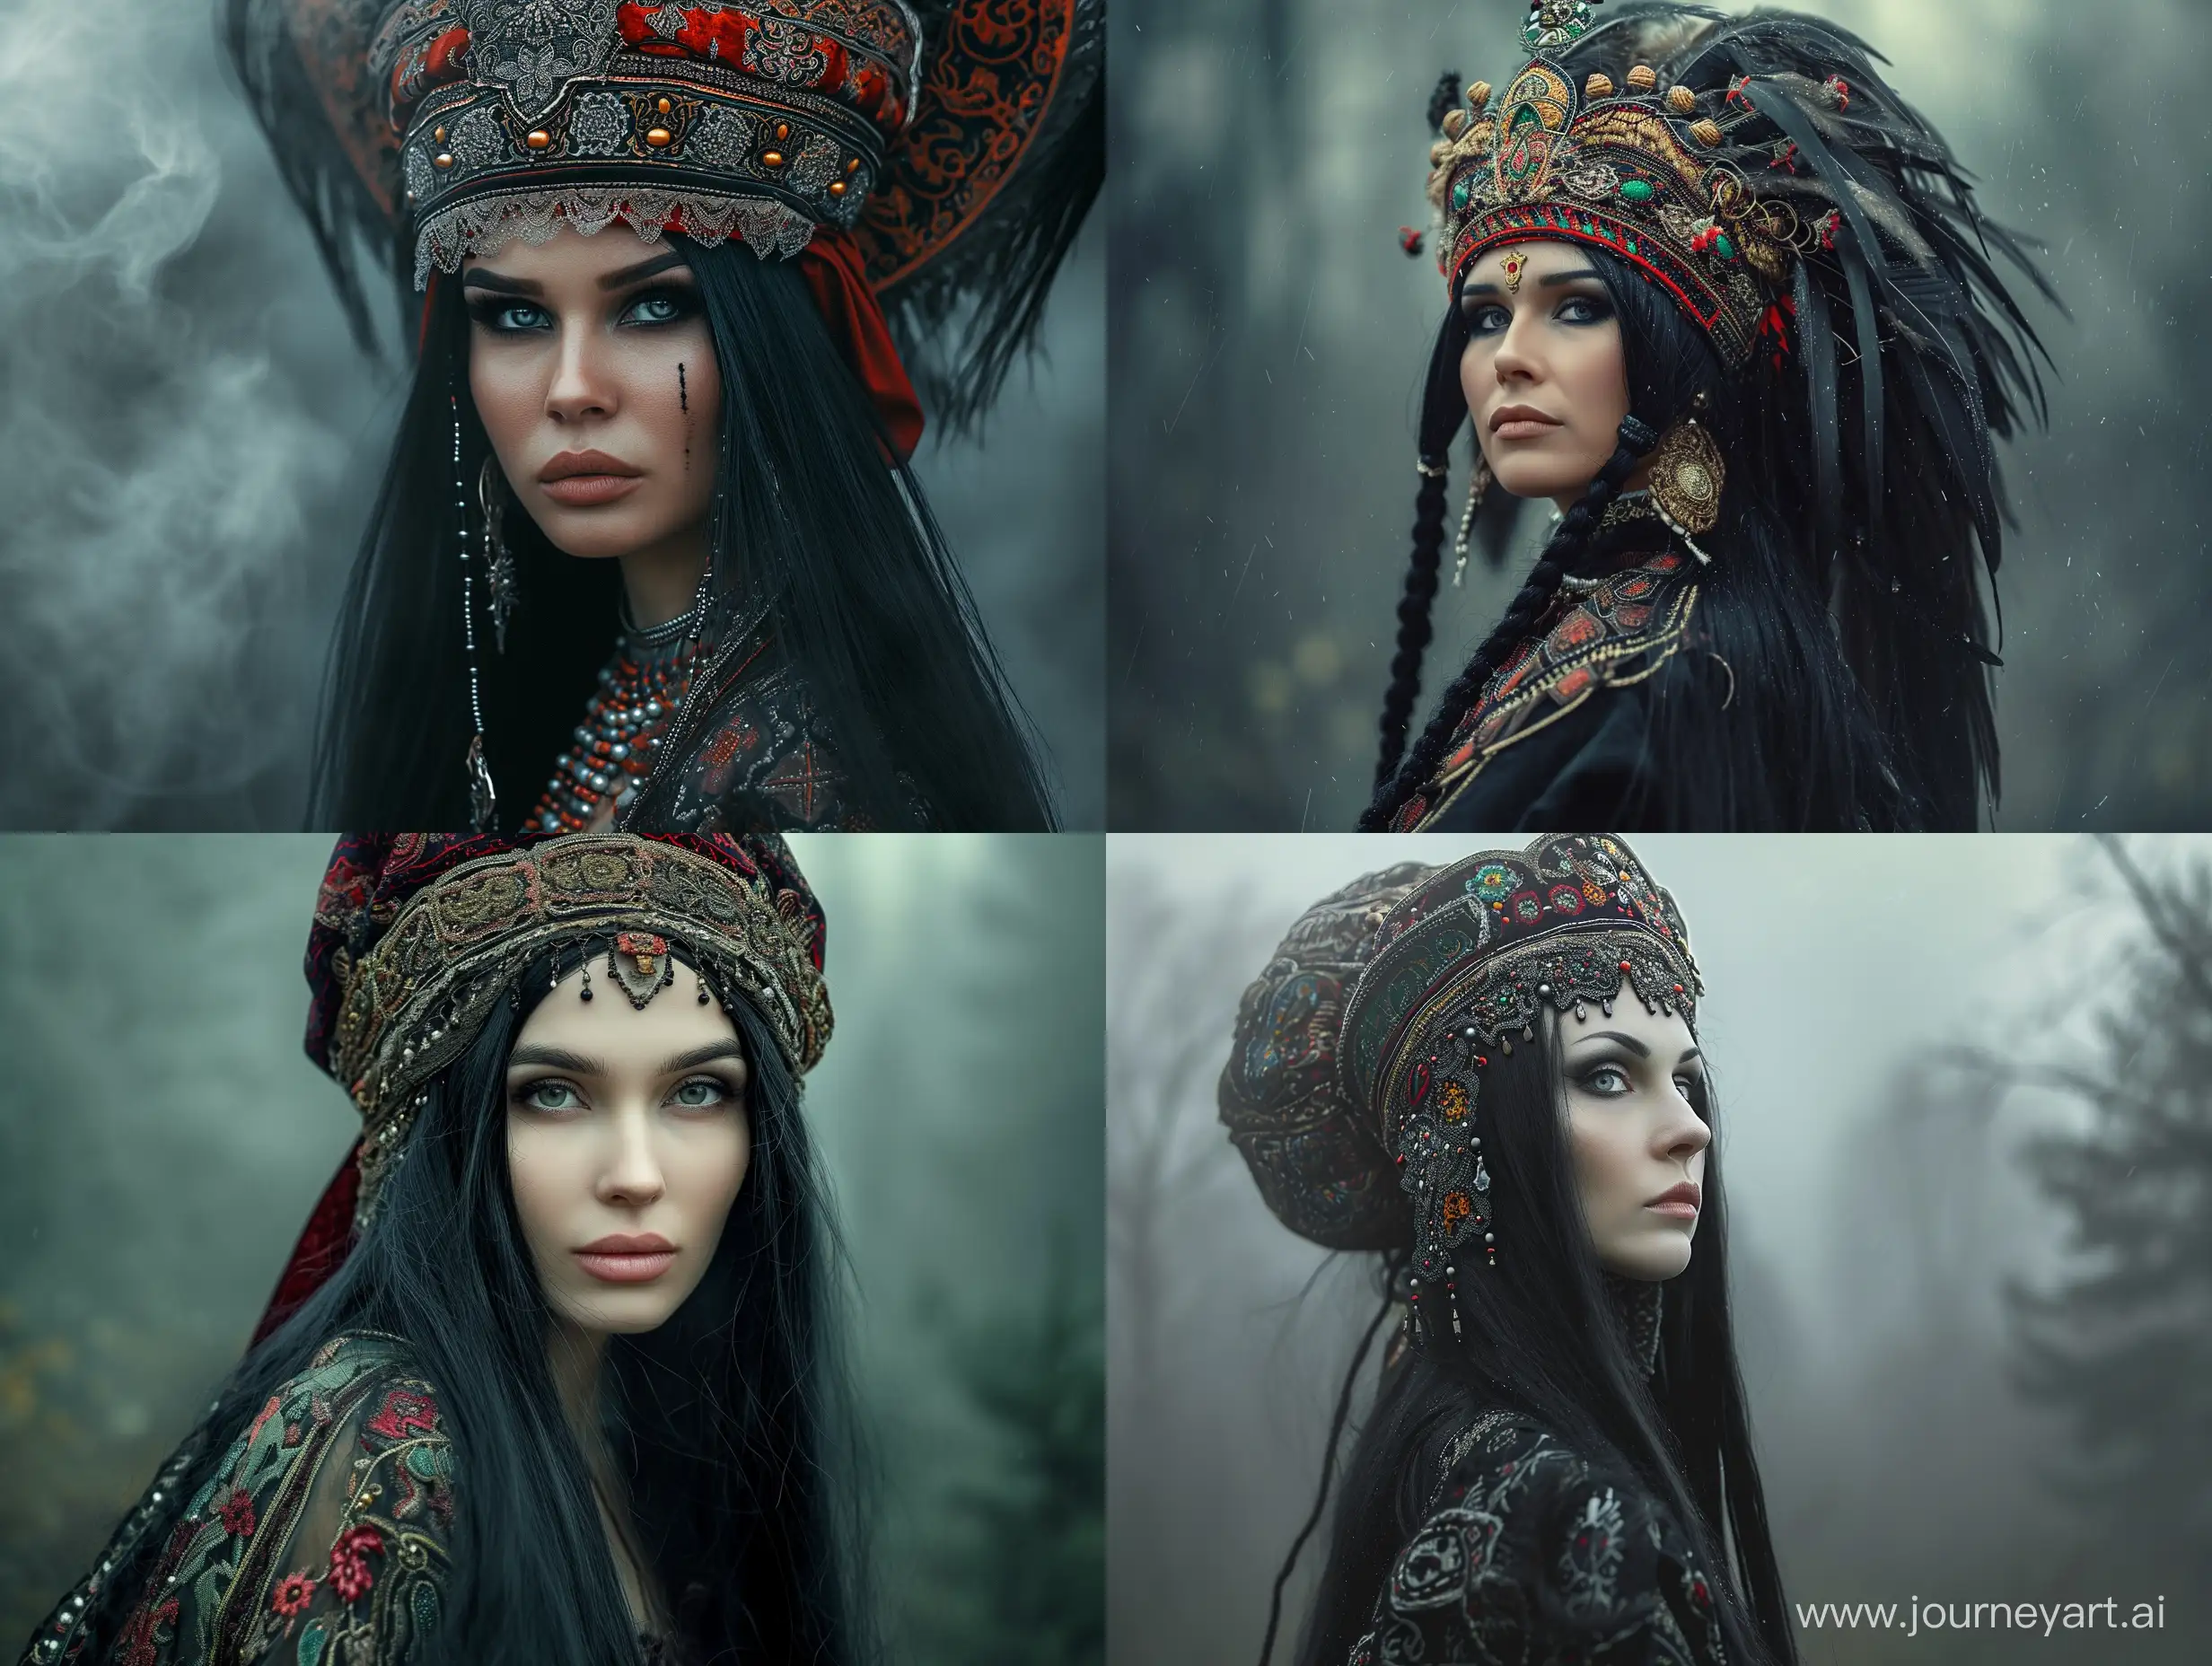 Russian-Folklore-Mystical-Beauty-Baba-Yaga-in-Traditional-Attire